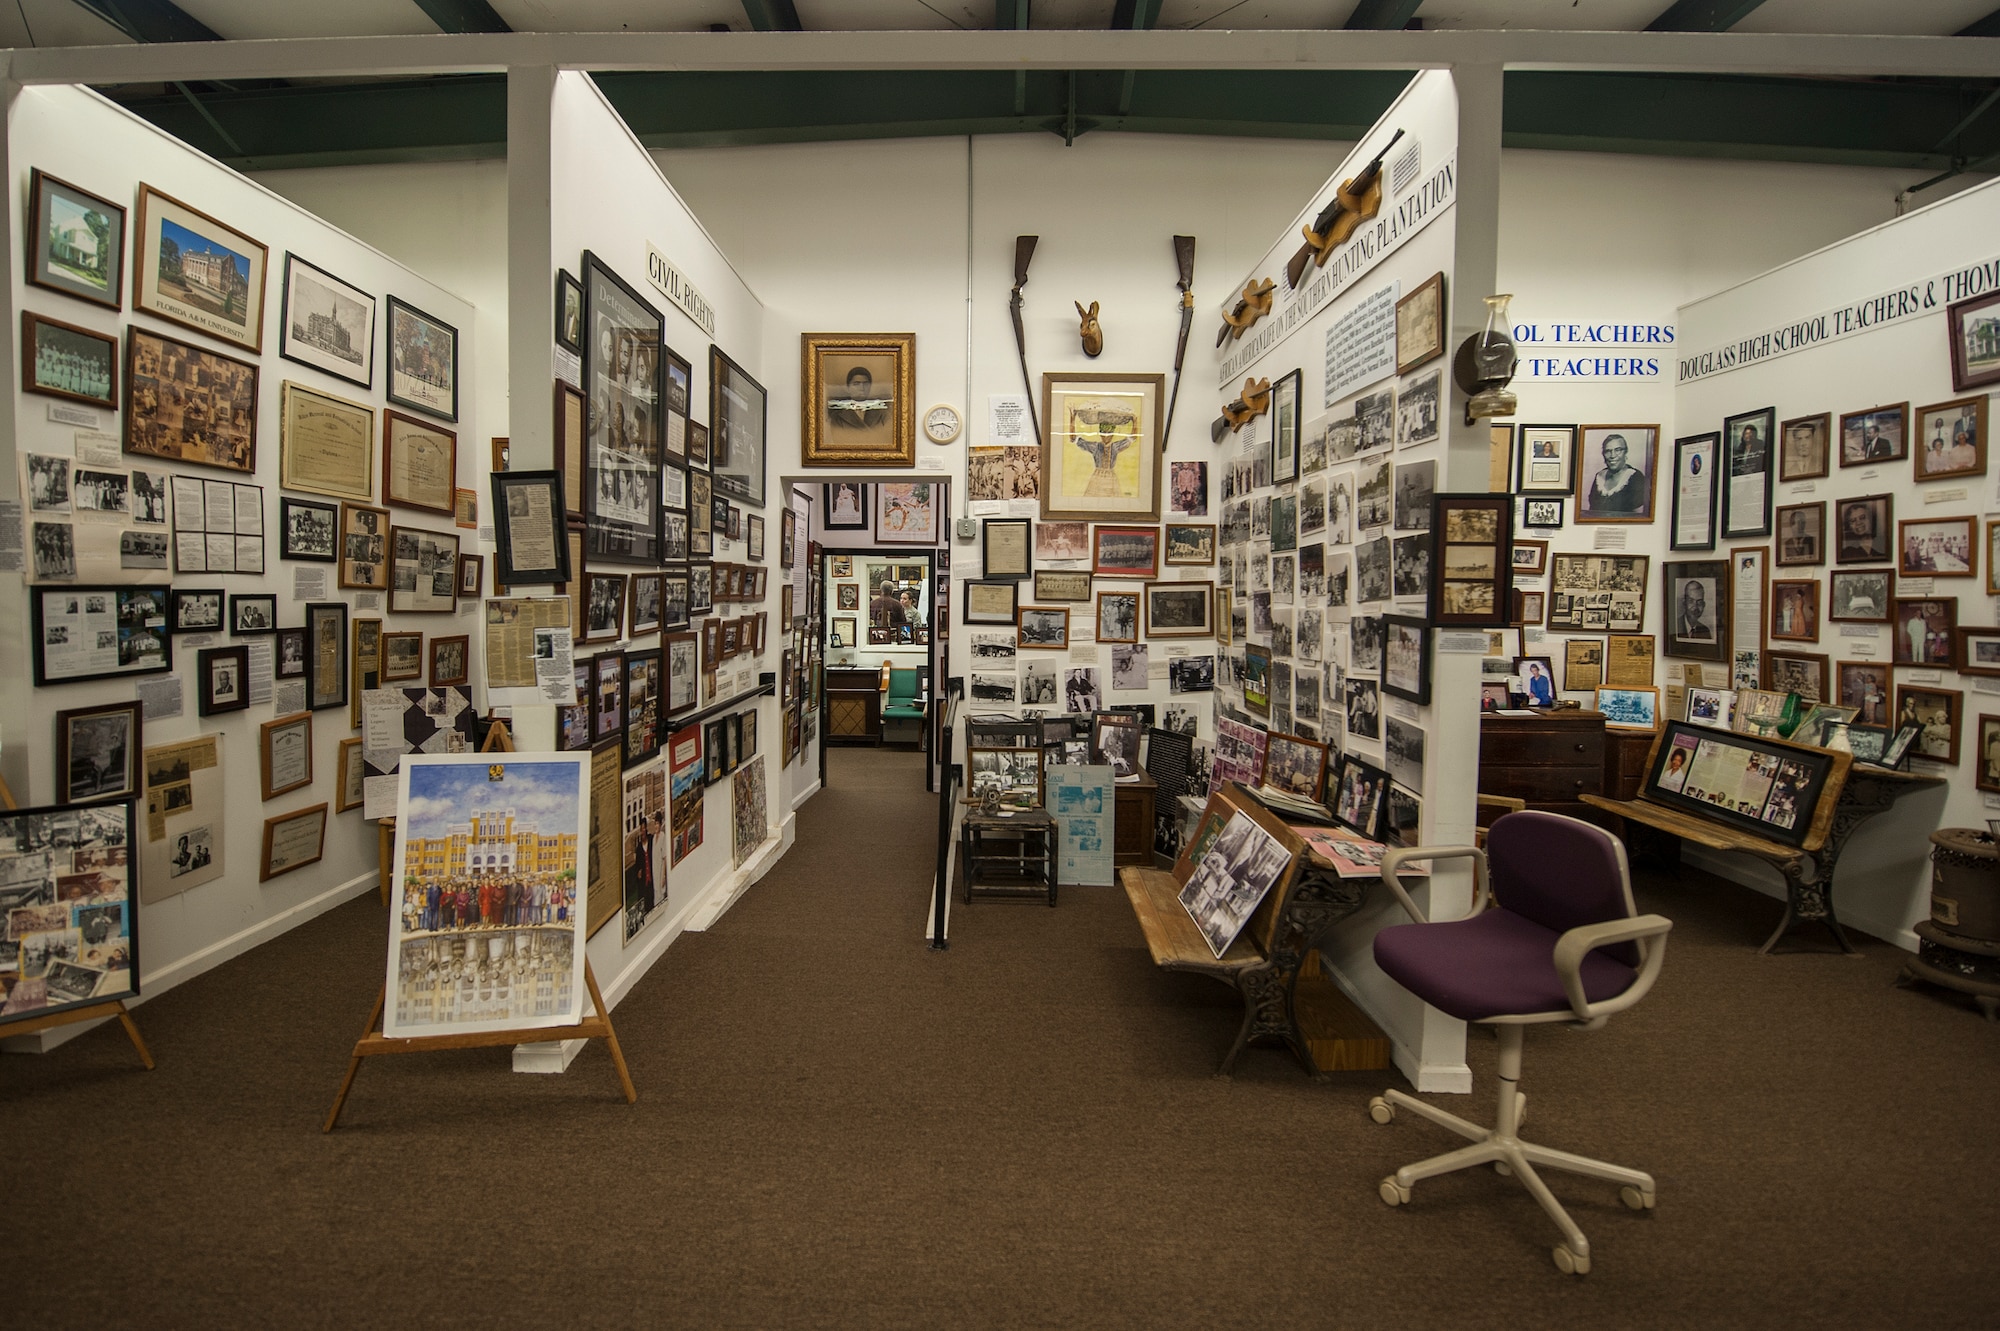 Artifacts from various periods in black history are displayed Feb. 8, 2016, at the Jack Hadley Black History Museum in Thomasville, Ga. The museum contains thousands of items dating back to the early 1800’s highlighting achievements and efforts made by black people within the local and national community.(U.S. Air Force photo by Airman 1st Class Janiqua P. Robinson/Released)
